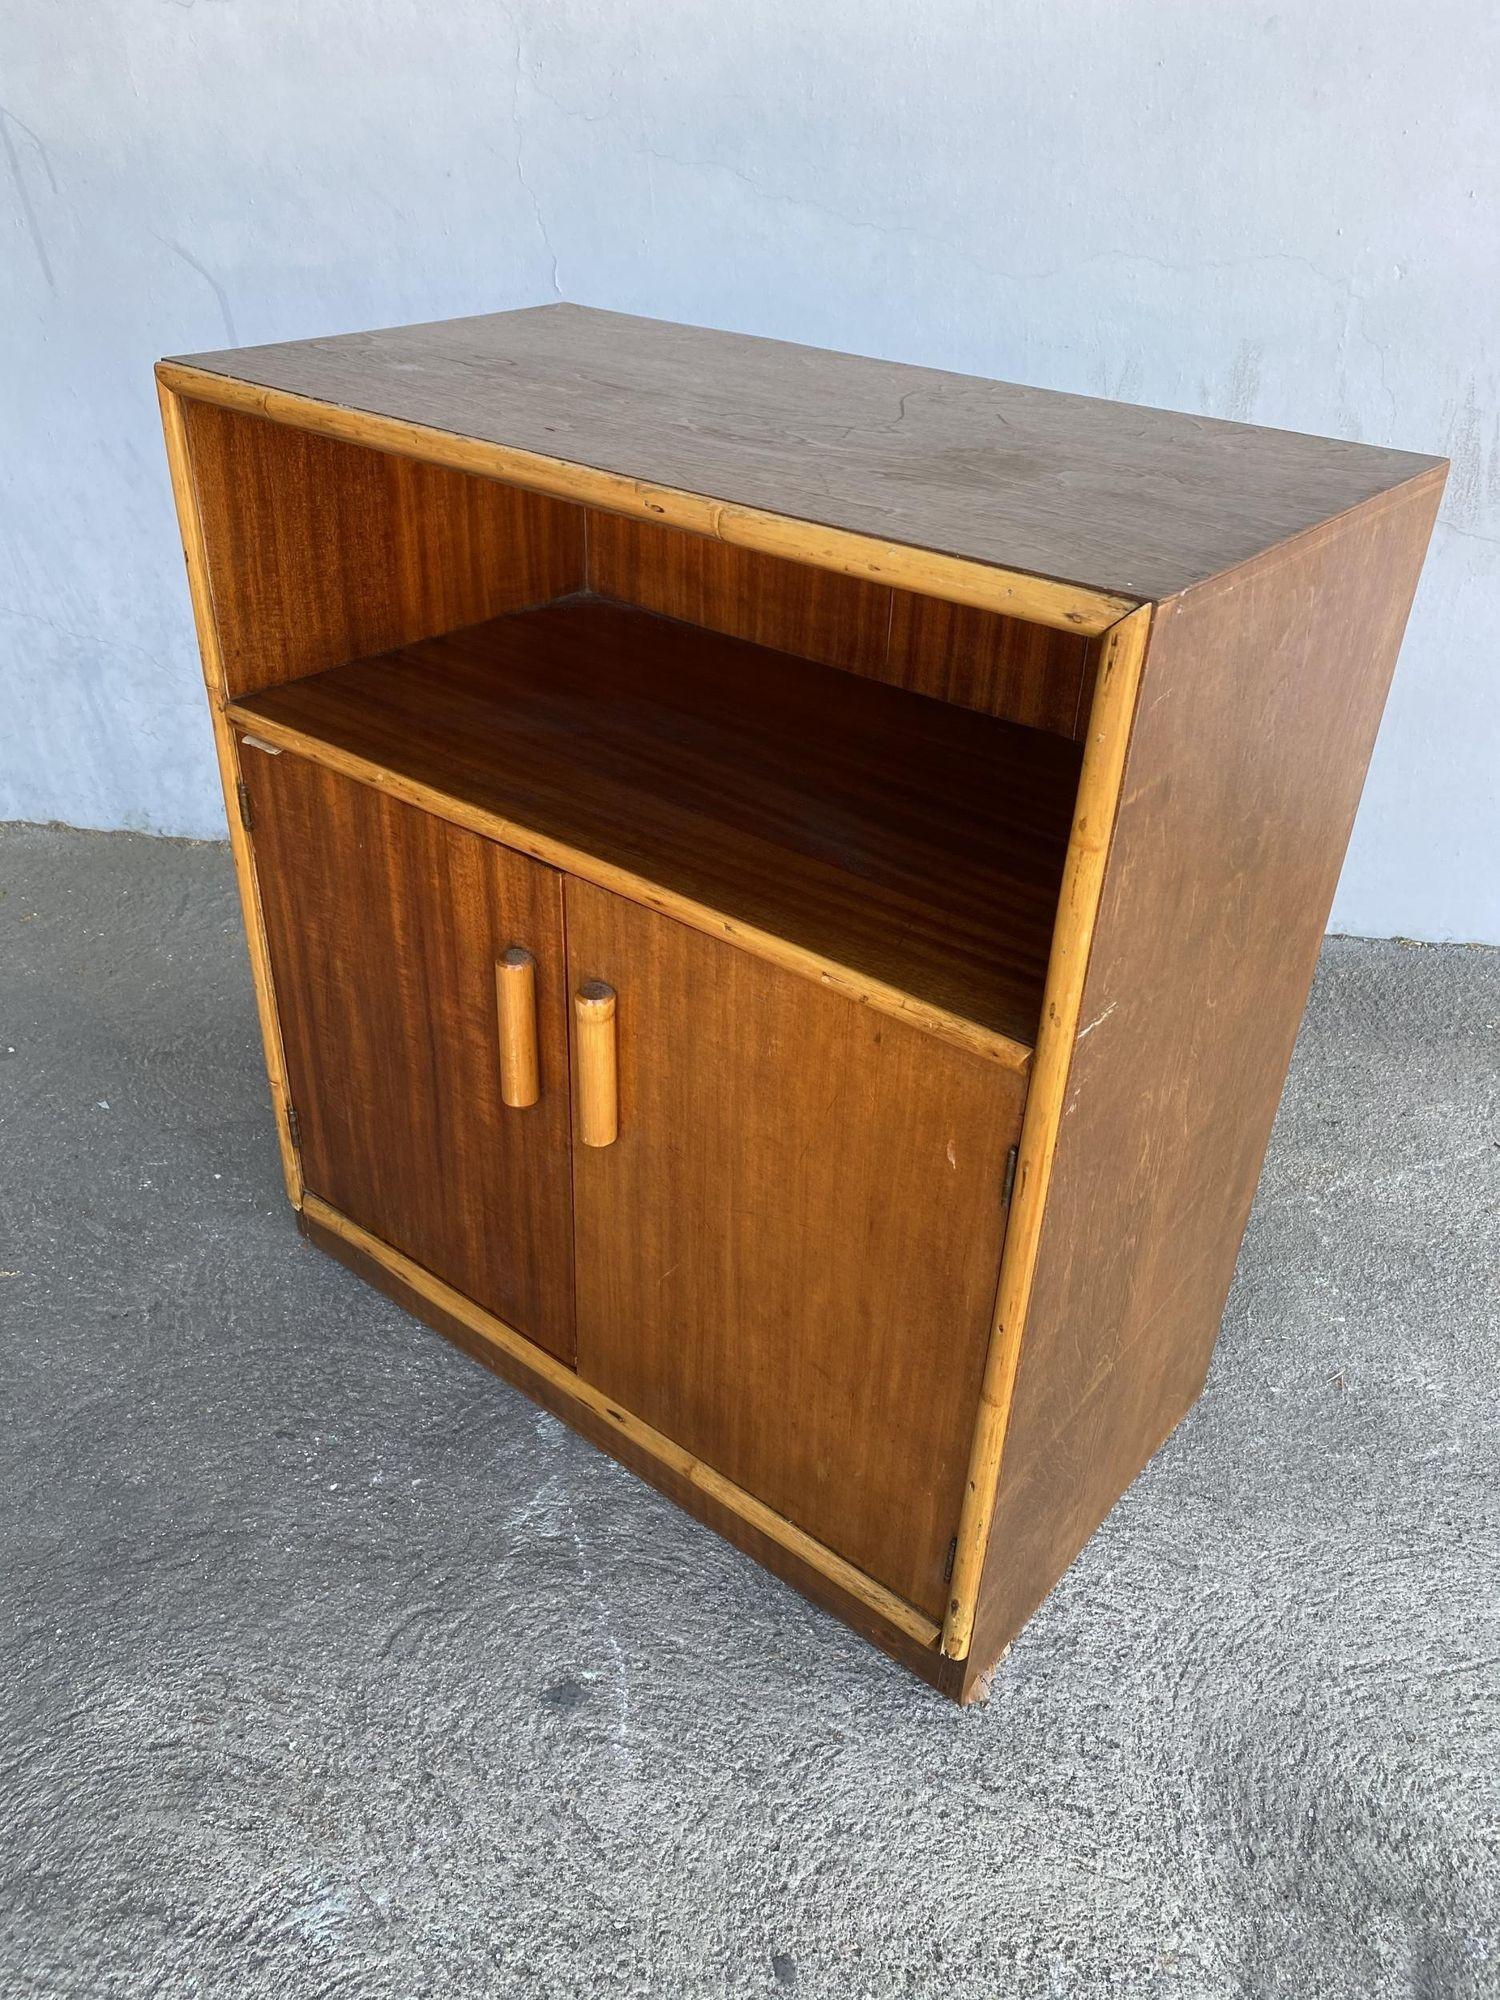 Restored Mahogany & Rattan Cabinet W/ Cubby Space In Excellent Condition For Sale In Van Nuys, CA